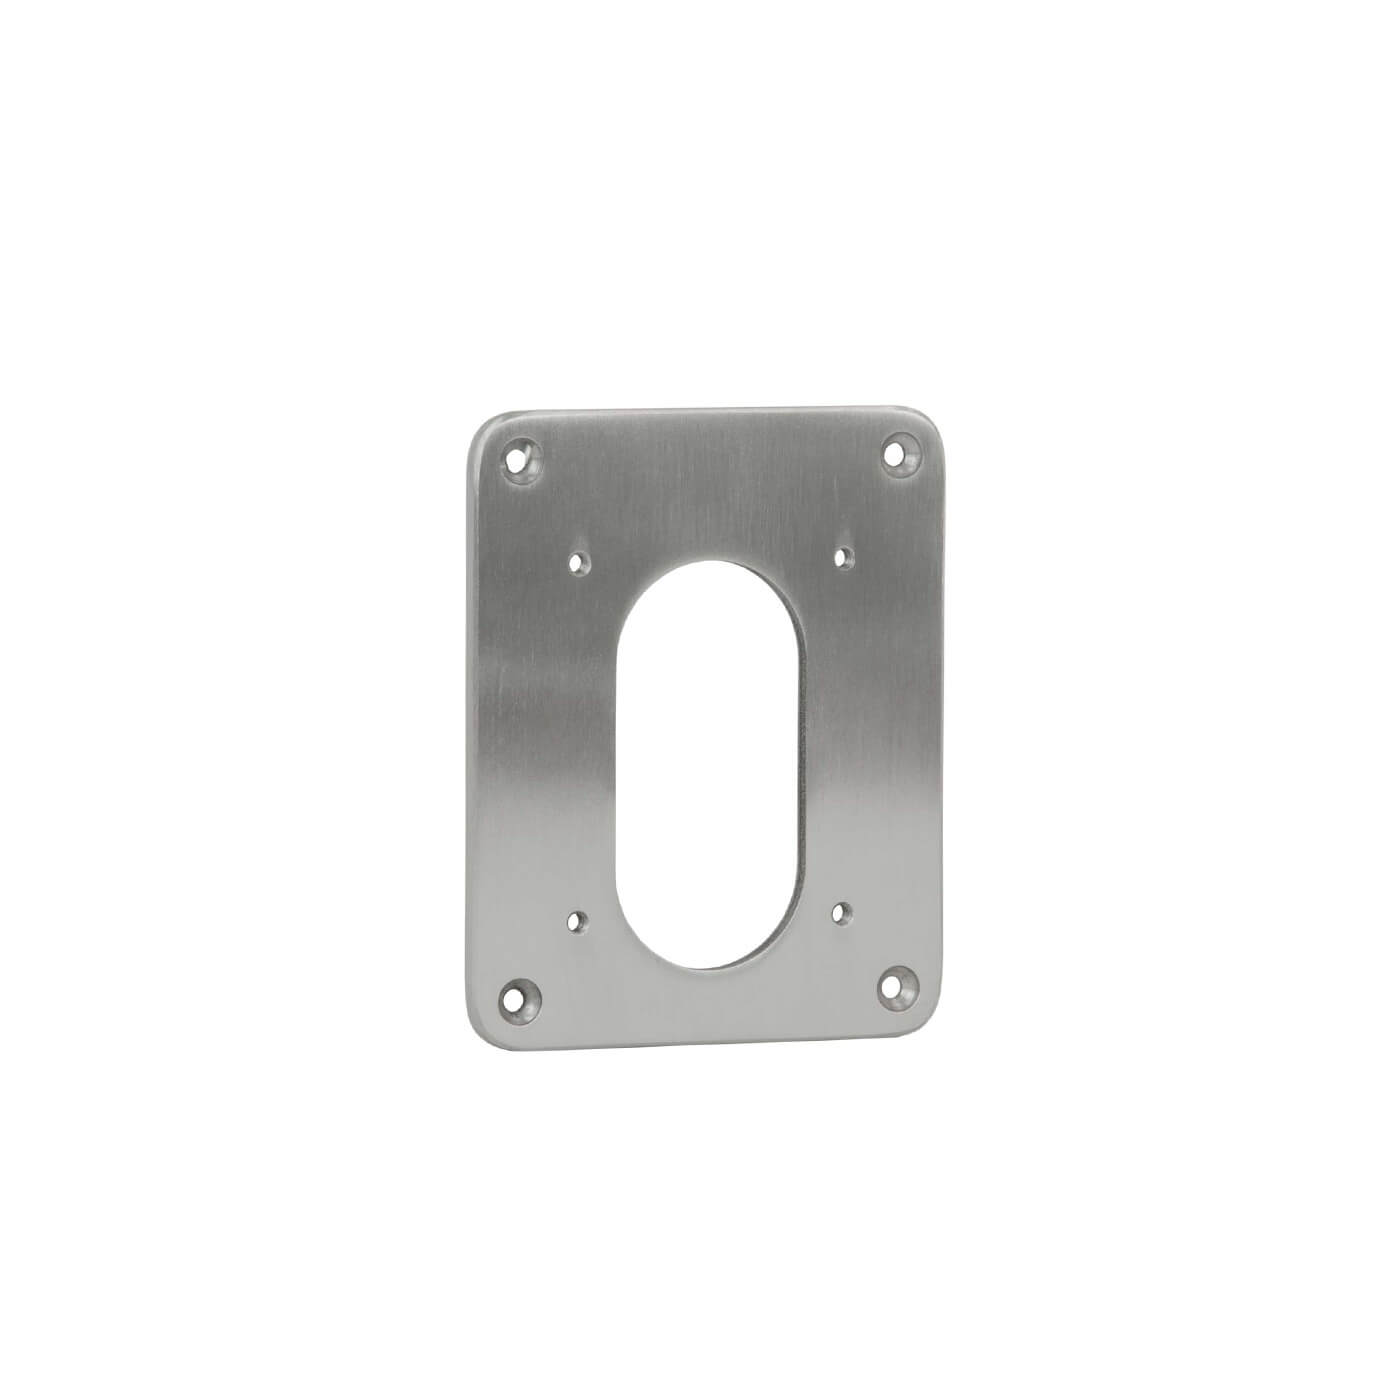 Aquor Stainless Steel Mounting Plate V2+ for House Hydrant V2+ and perfect for brick and stucco